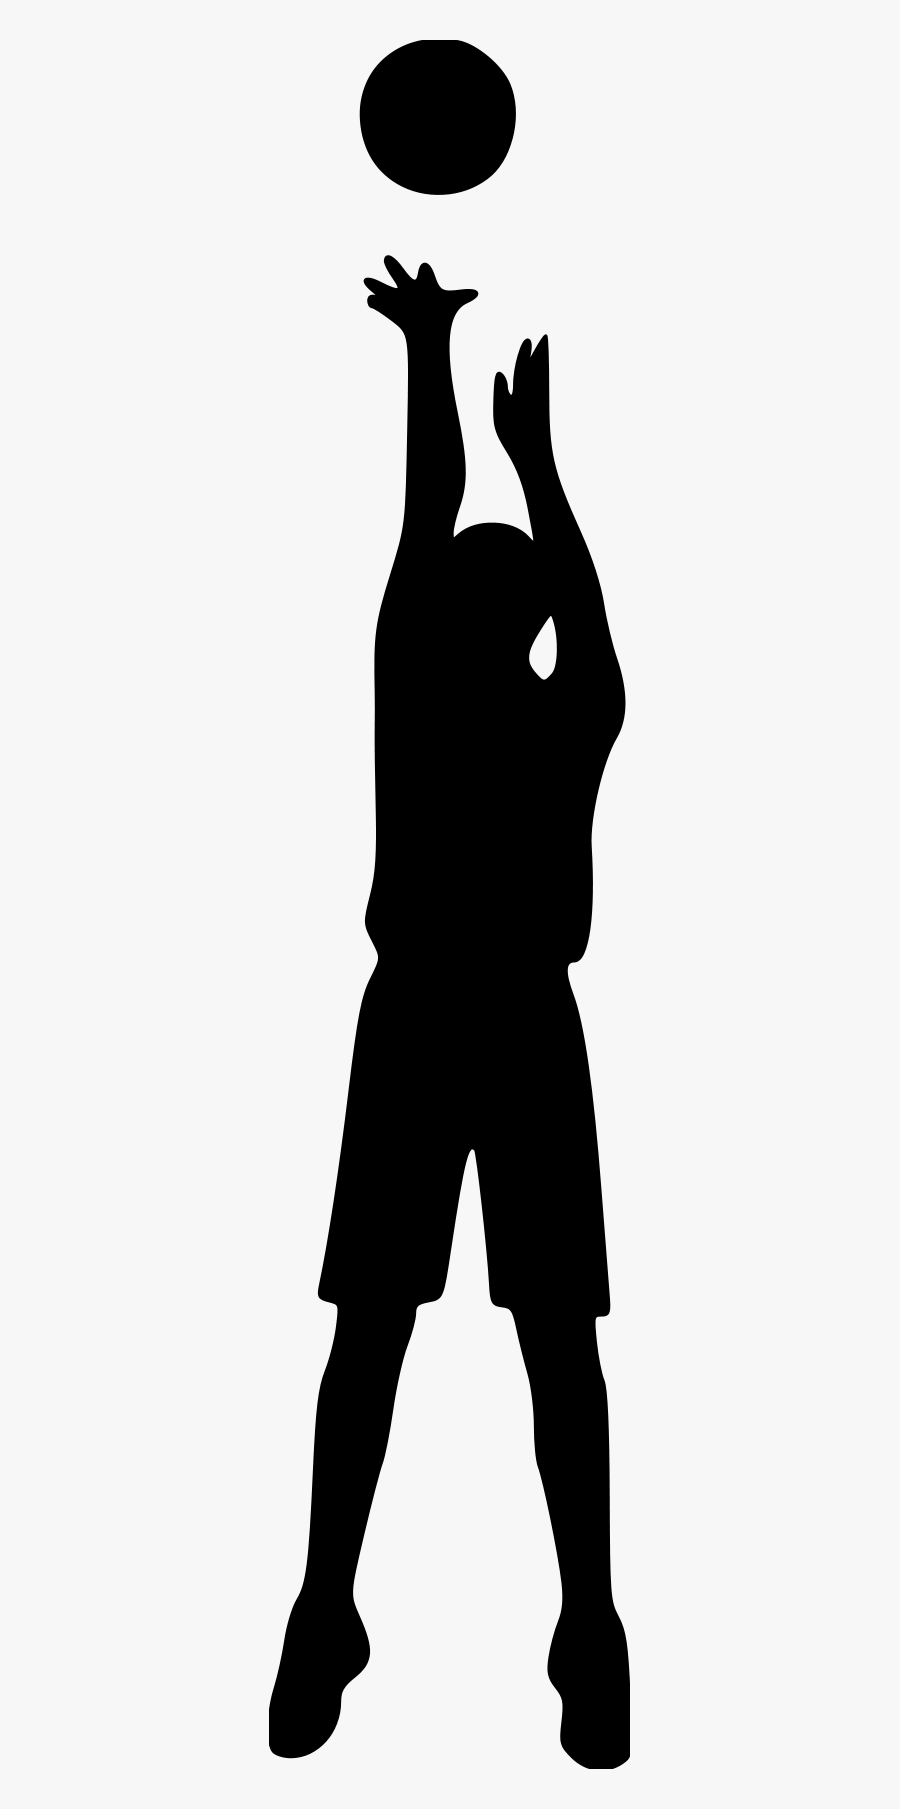 Amazin Tumbler Image Gallery For Cusyom Tumbler Designs - Basketball Shooting Silhouette Png, Transparent Clipart